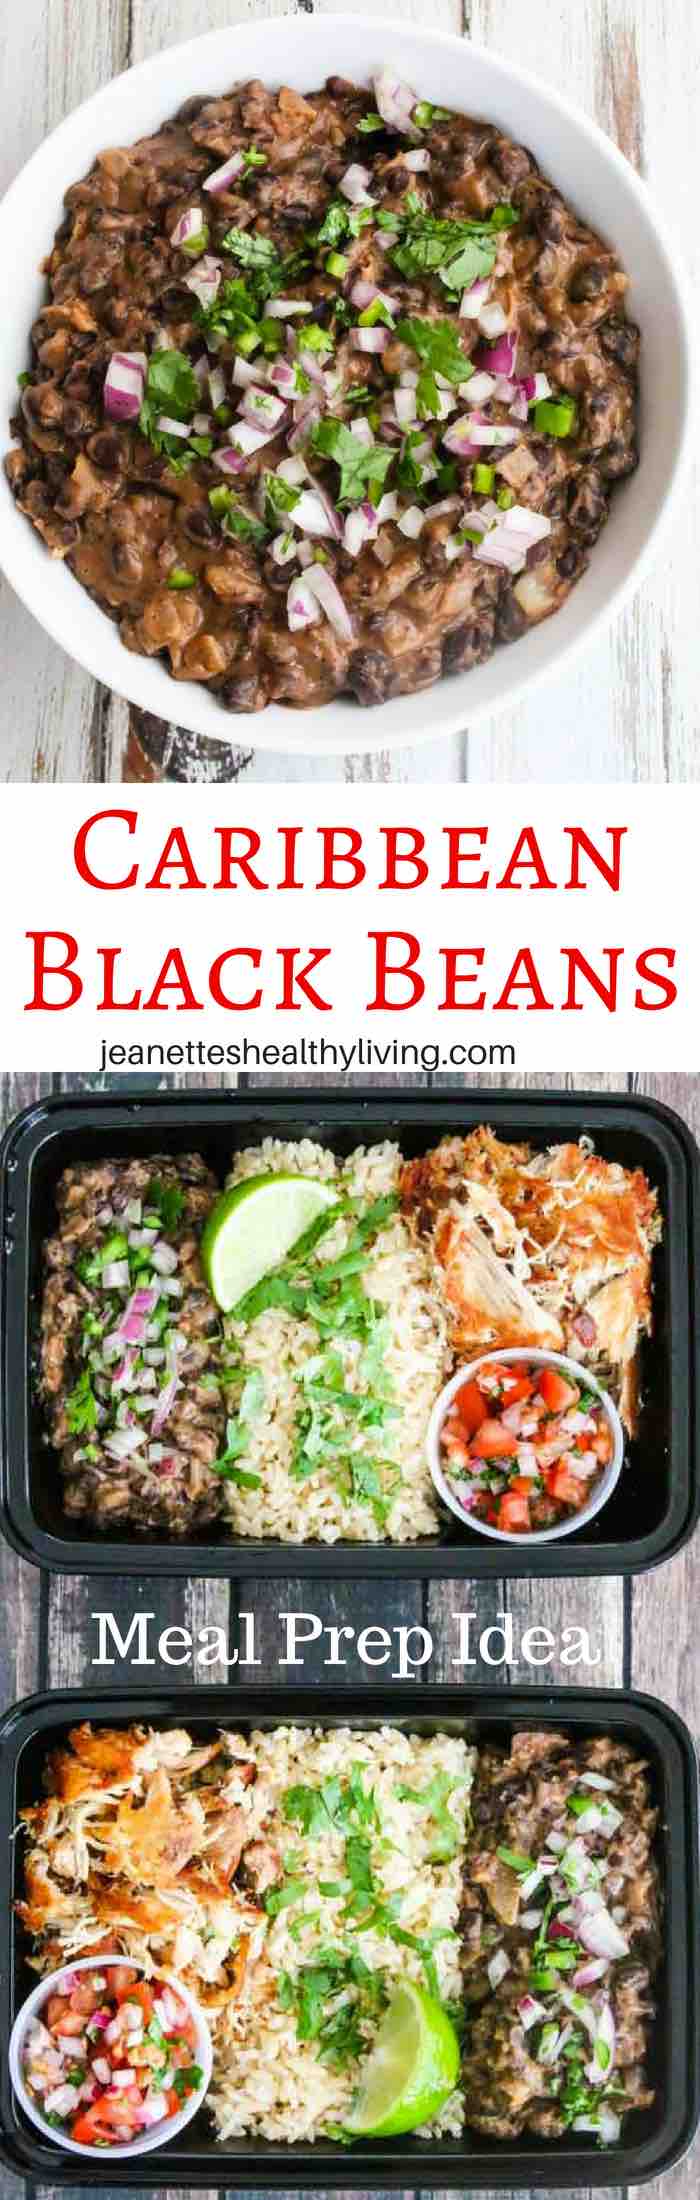 Caribbean Black Beans - quick, easy, healthy vegetarian/vegan dish; cilantro onion jalapeno salsa on top; great for meal prep